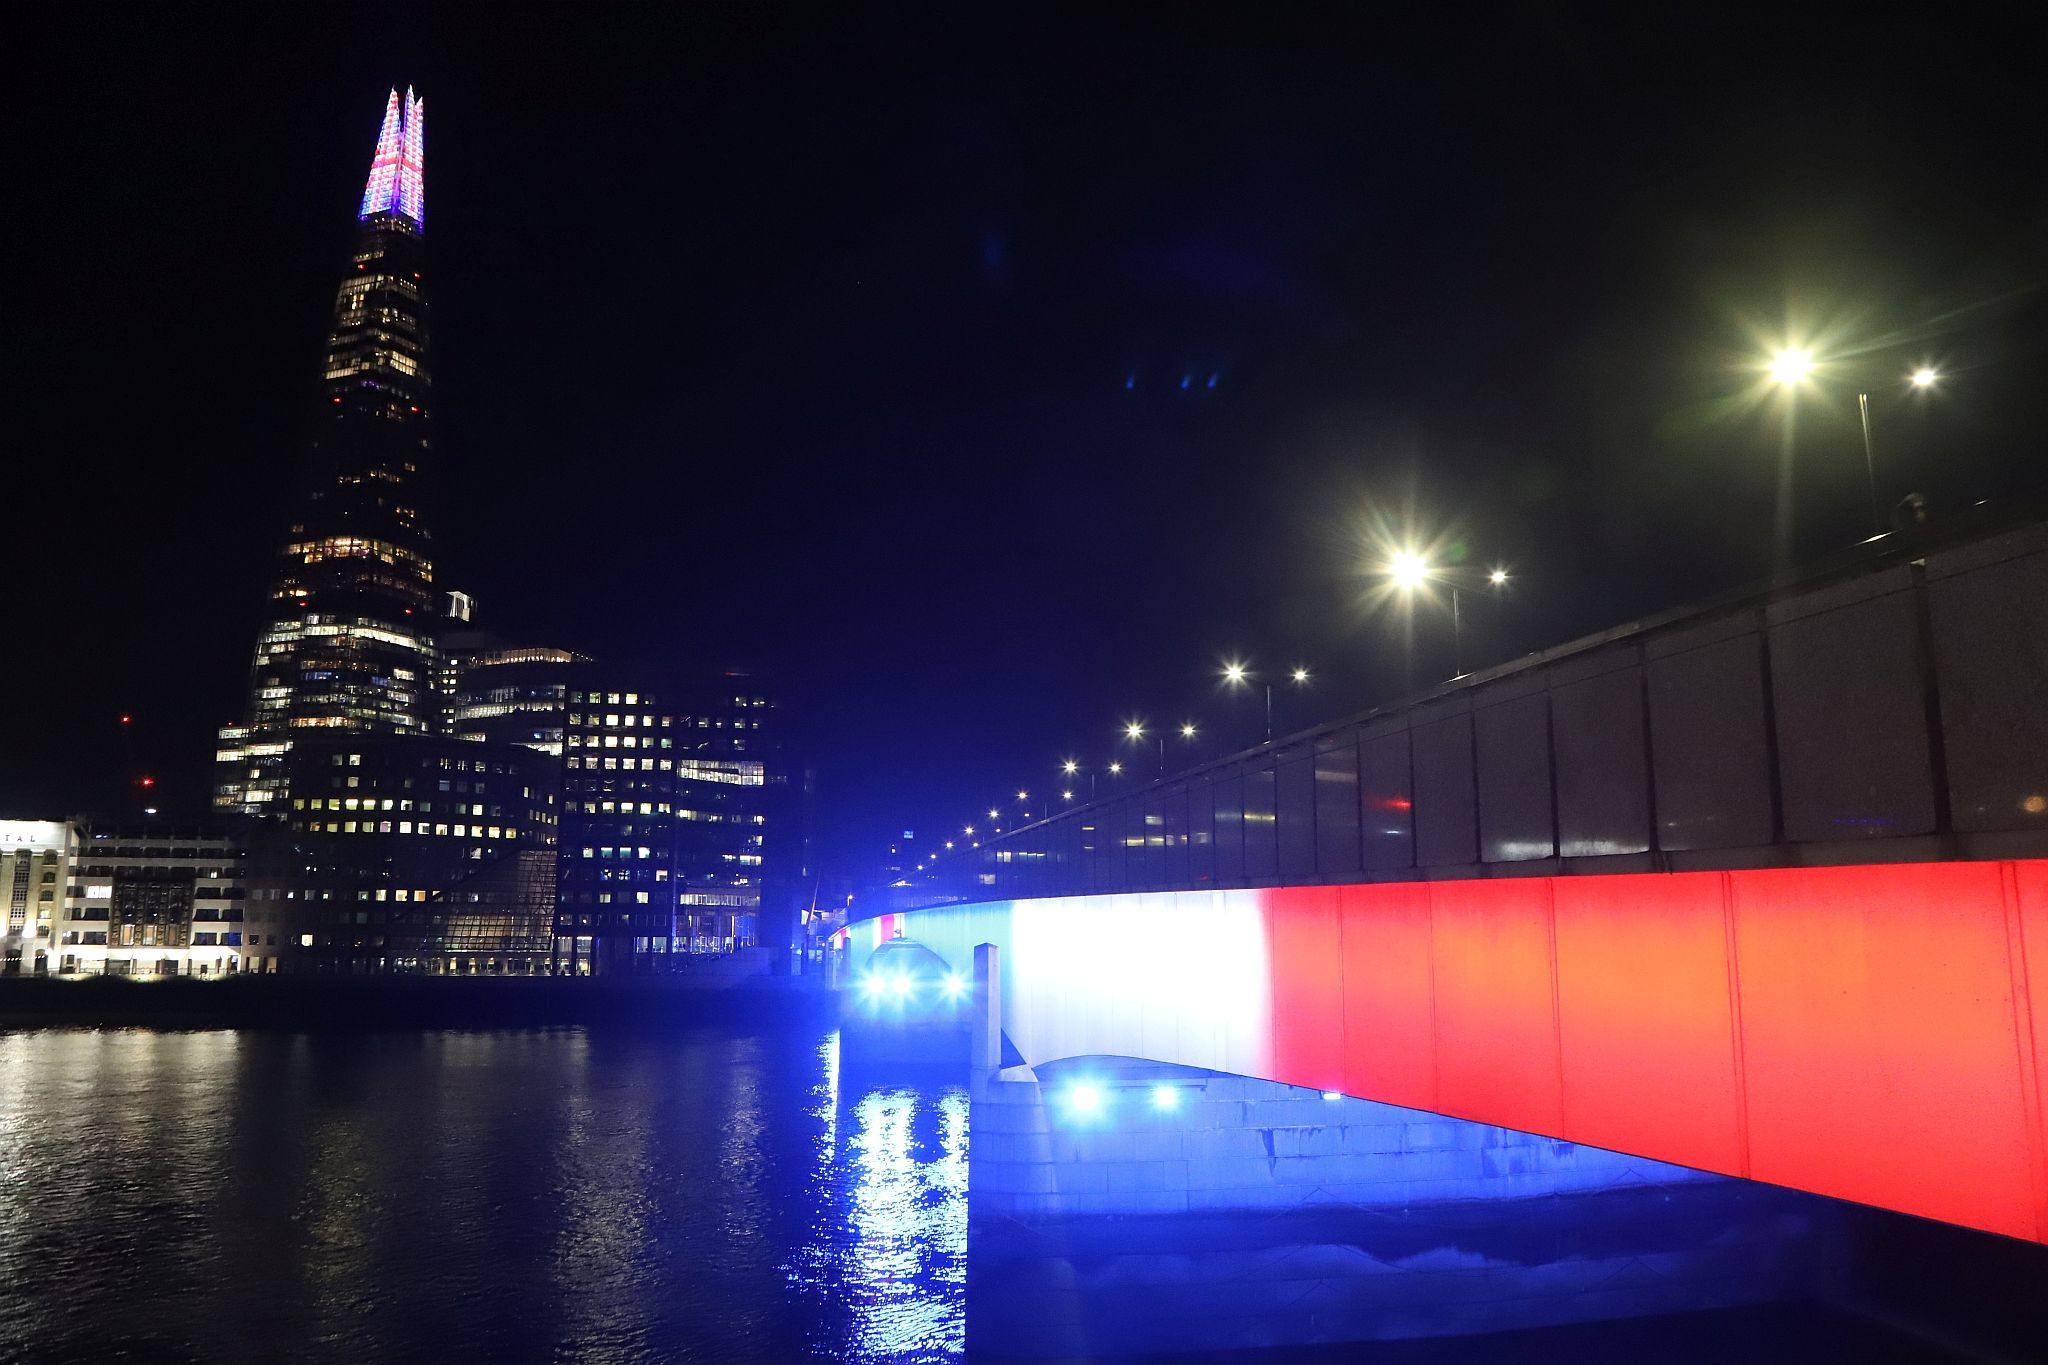 The Shard London Bridge lit red, white and blue to mark the Coronation of King Charles III and Queen Camilla. Photo taken 07-May-2023. London.